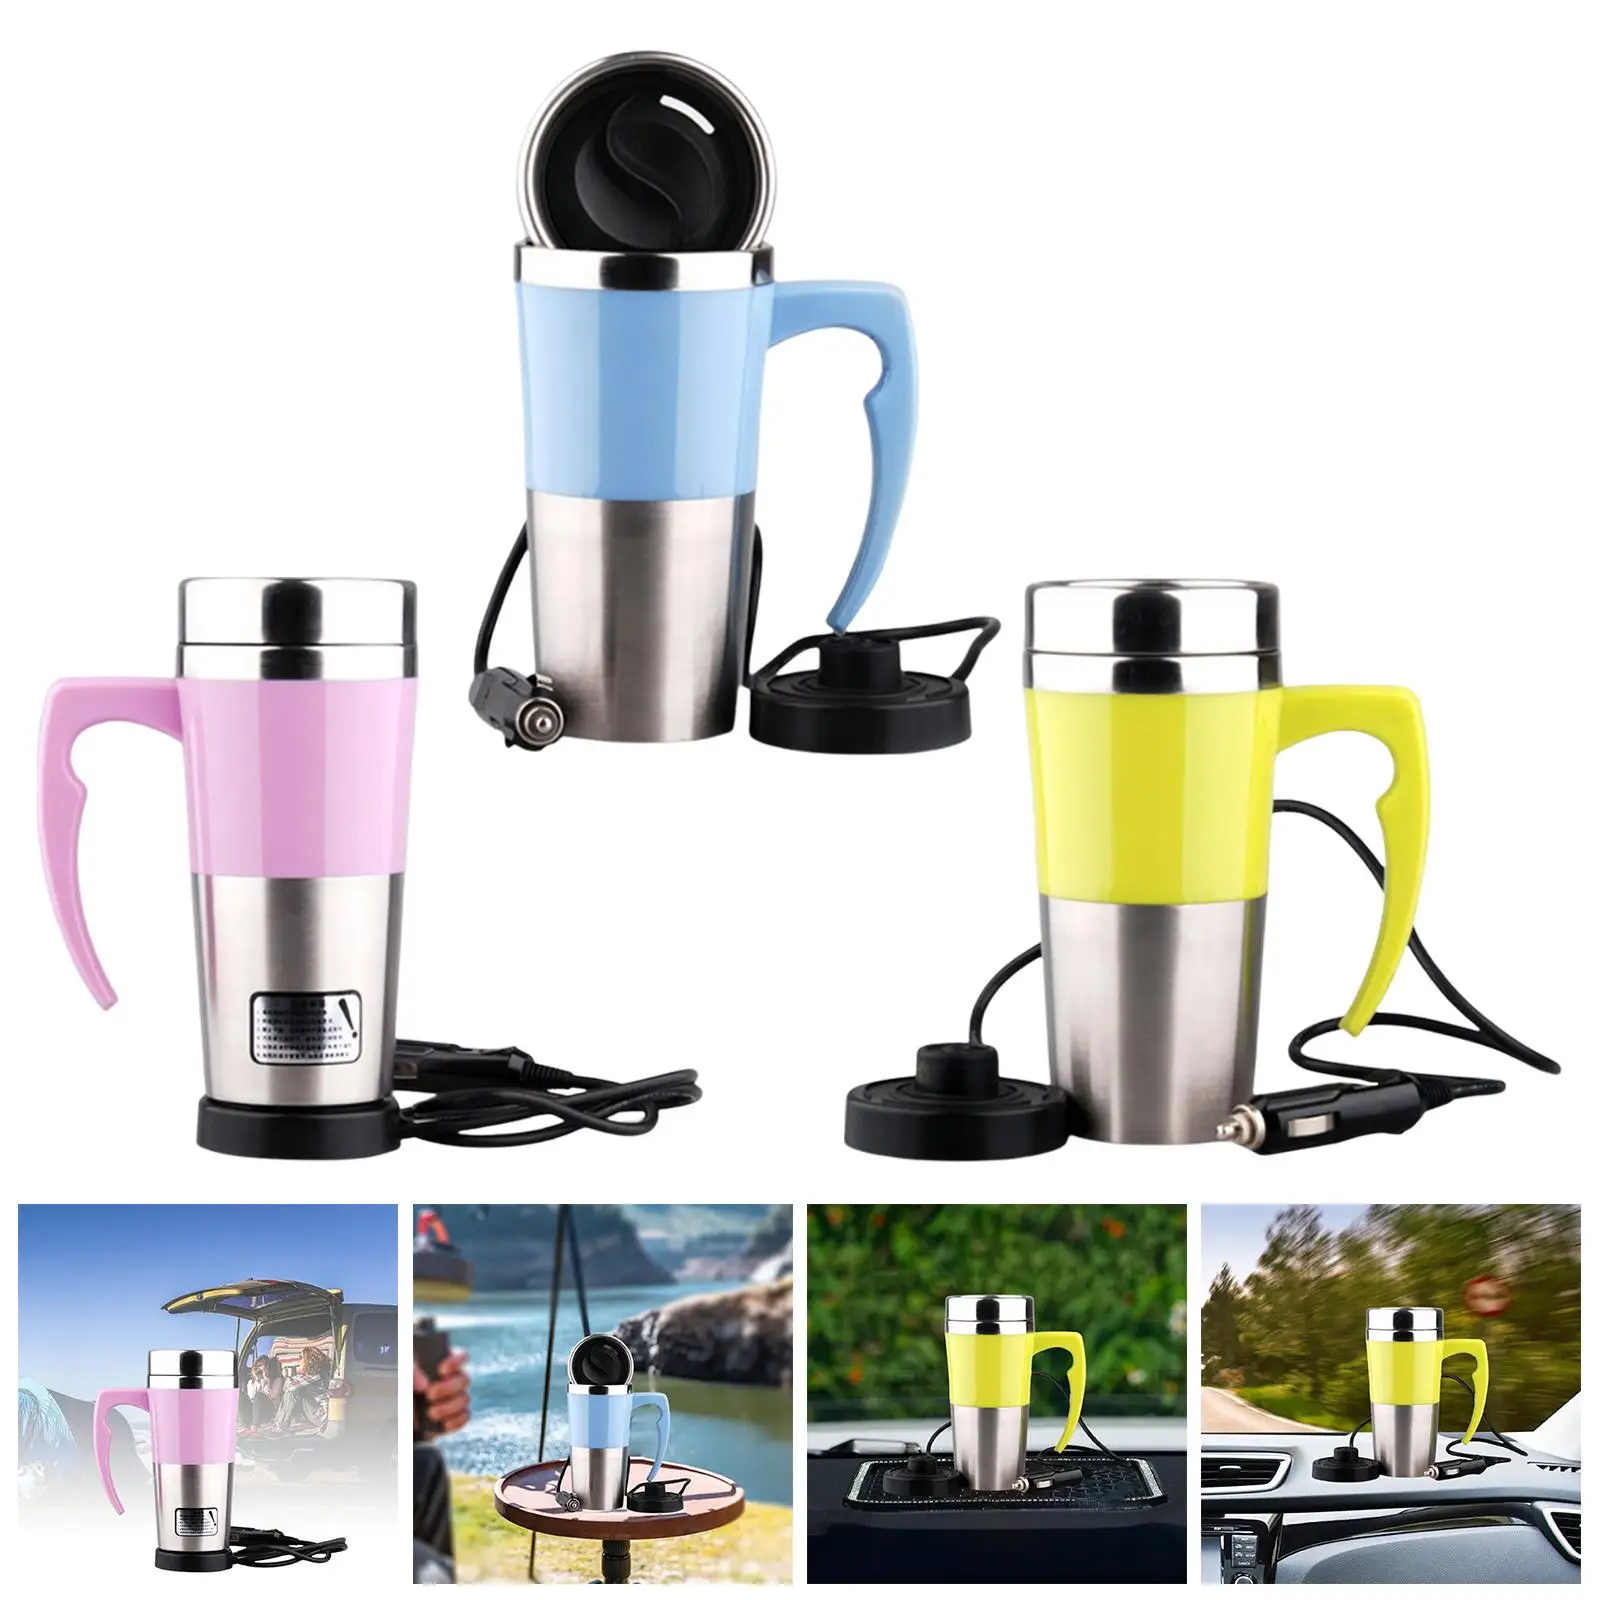   Kettle 350ml 12V Travel Heating Cup for Tea Hot Water Eggs